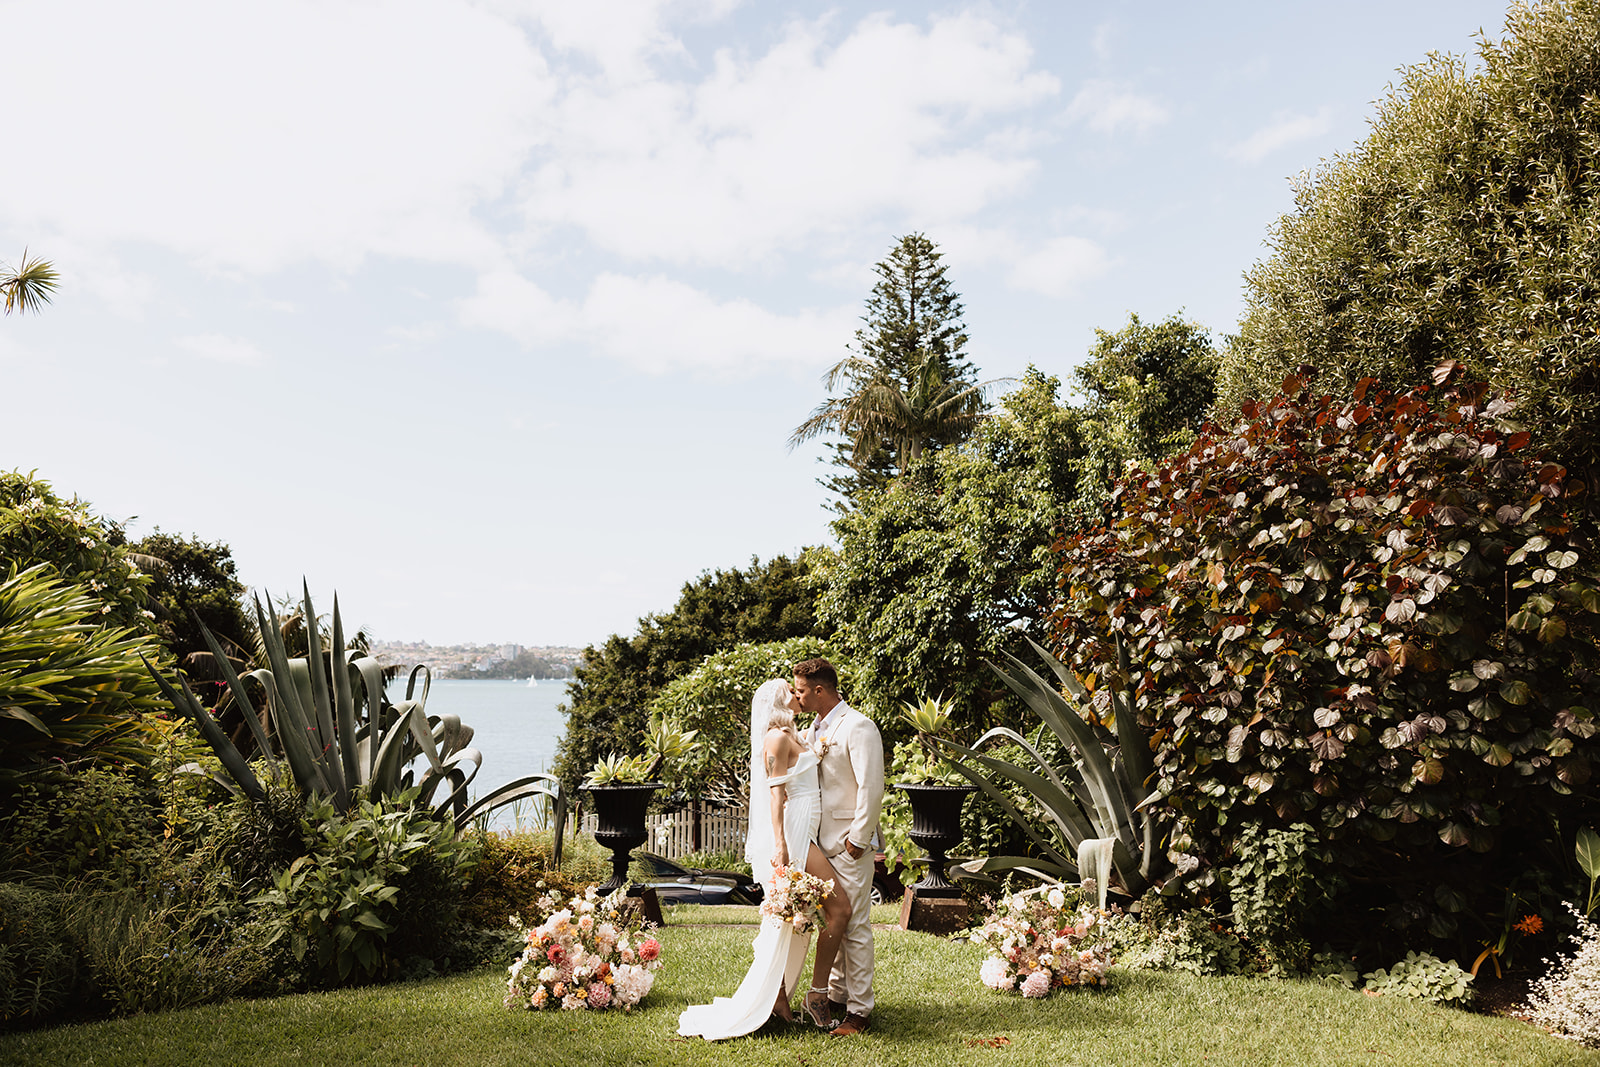 Bridal Portraits at the Wedding in Lindesay House, Darling Point New South Wales